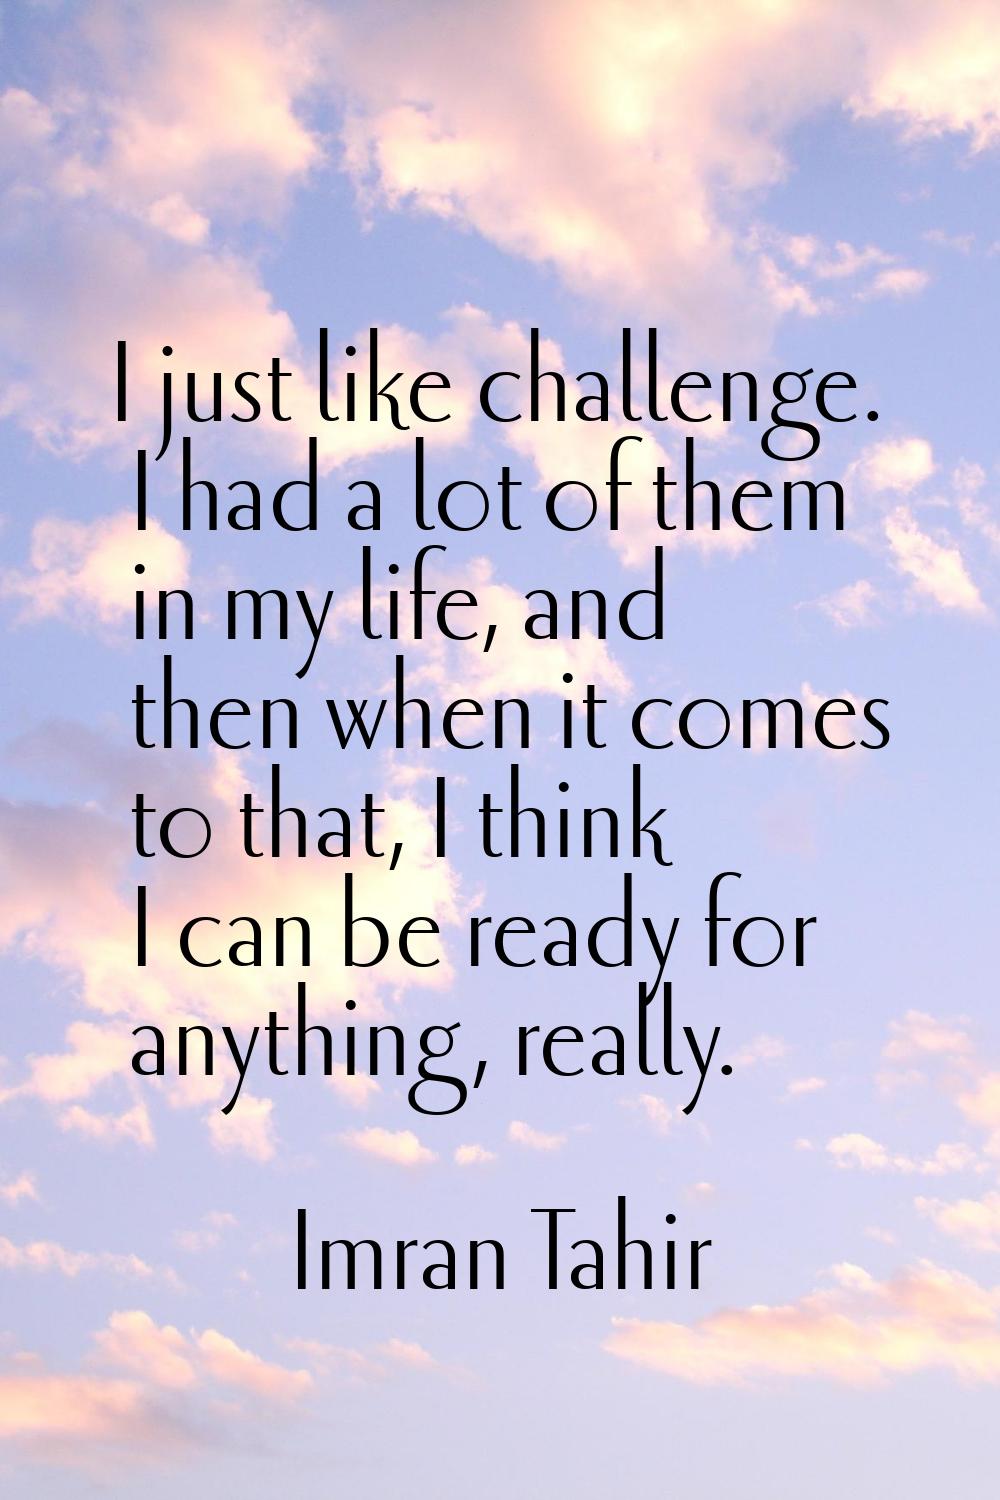 I just like challenge. I had a lot of them in my life, and then when it comes to that, I think I ca